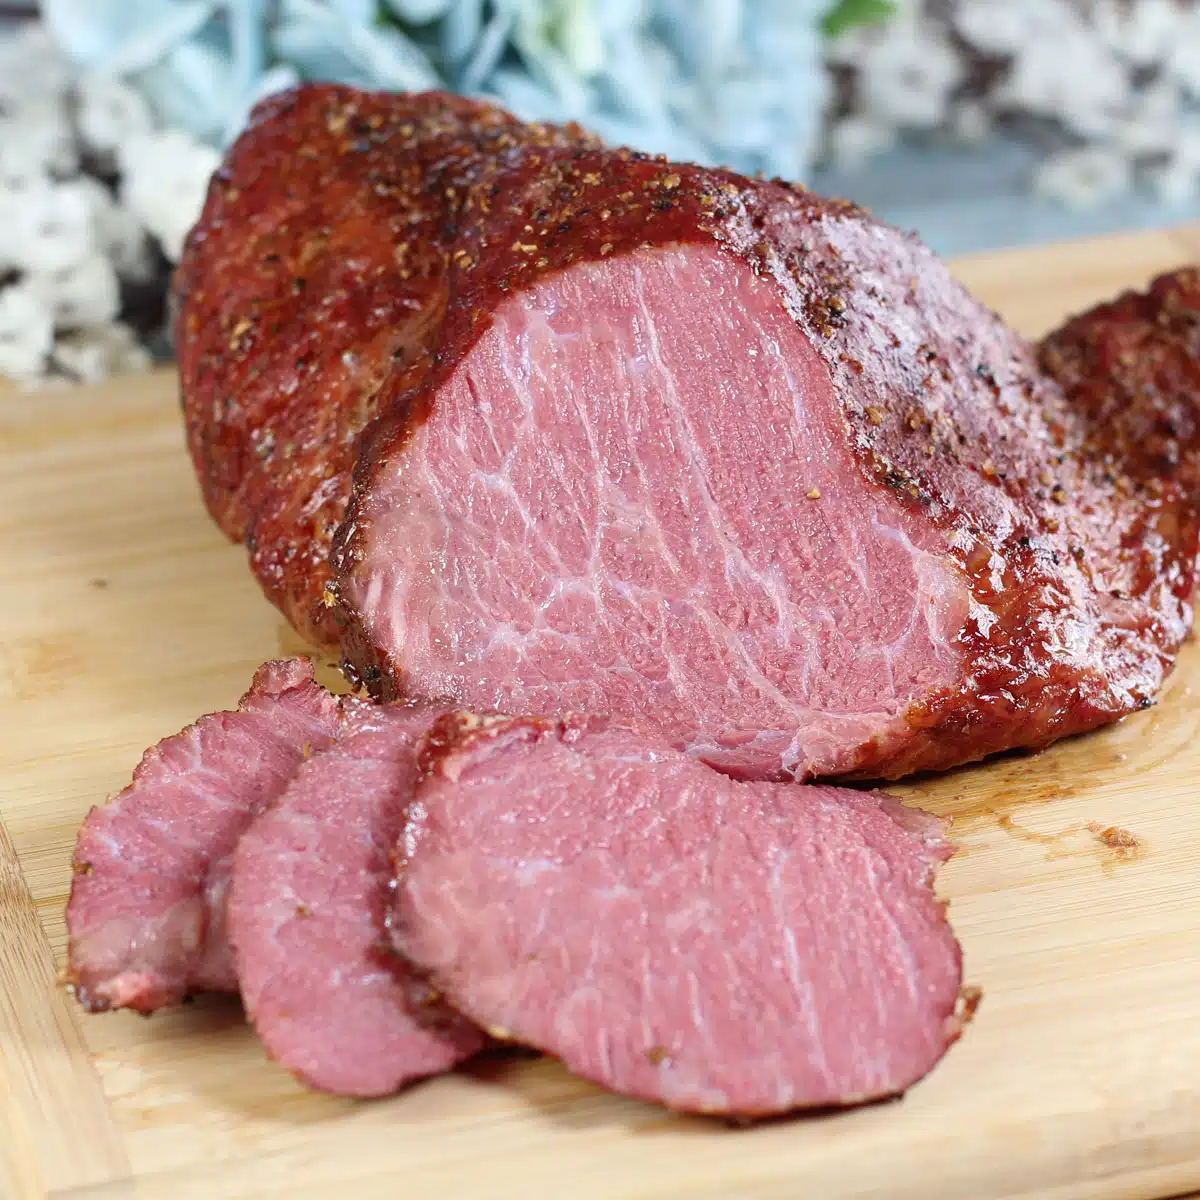 Square image showing smoked corned beef on a cutting board.